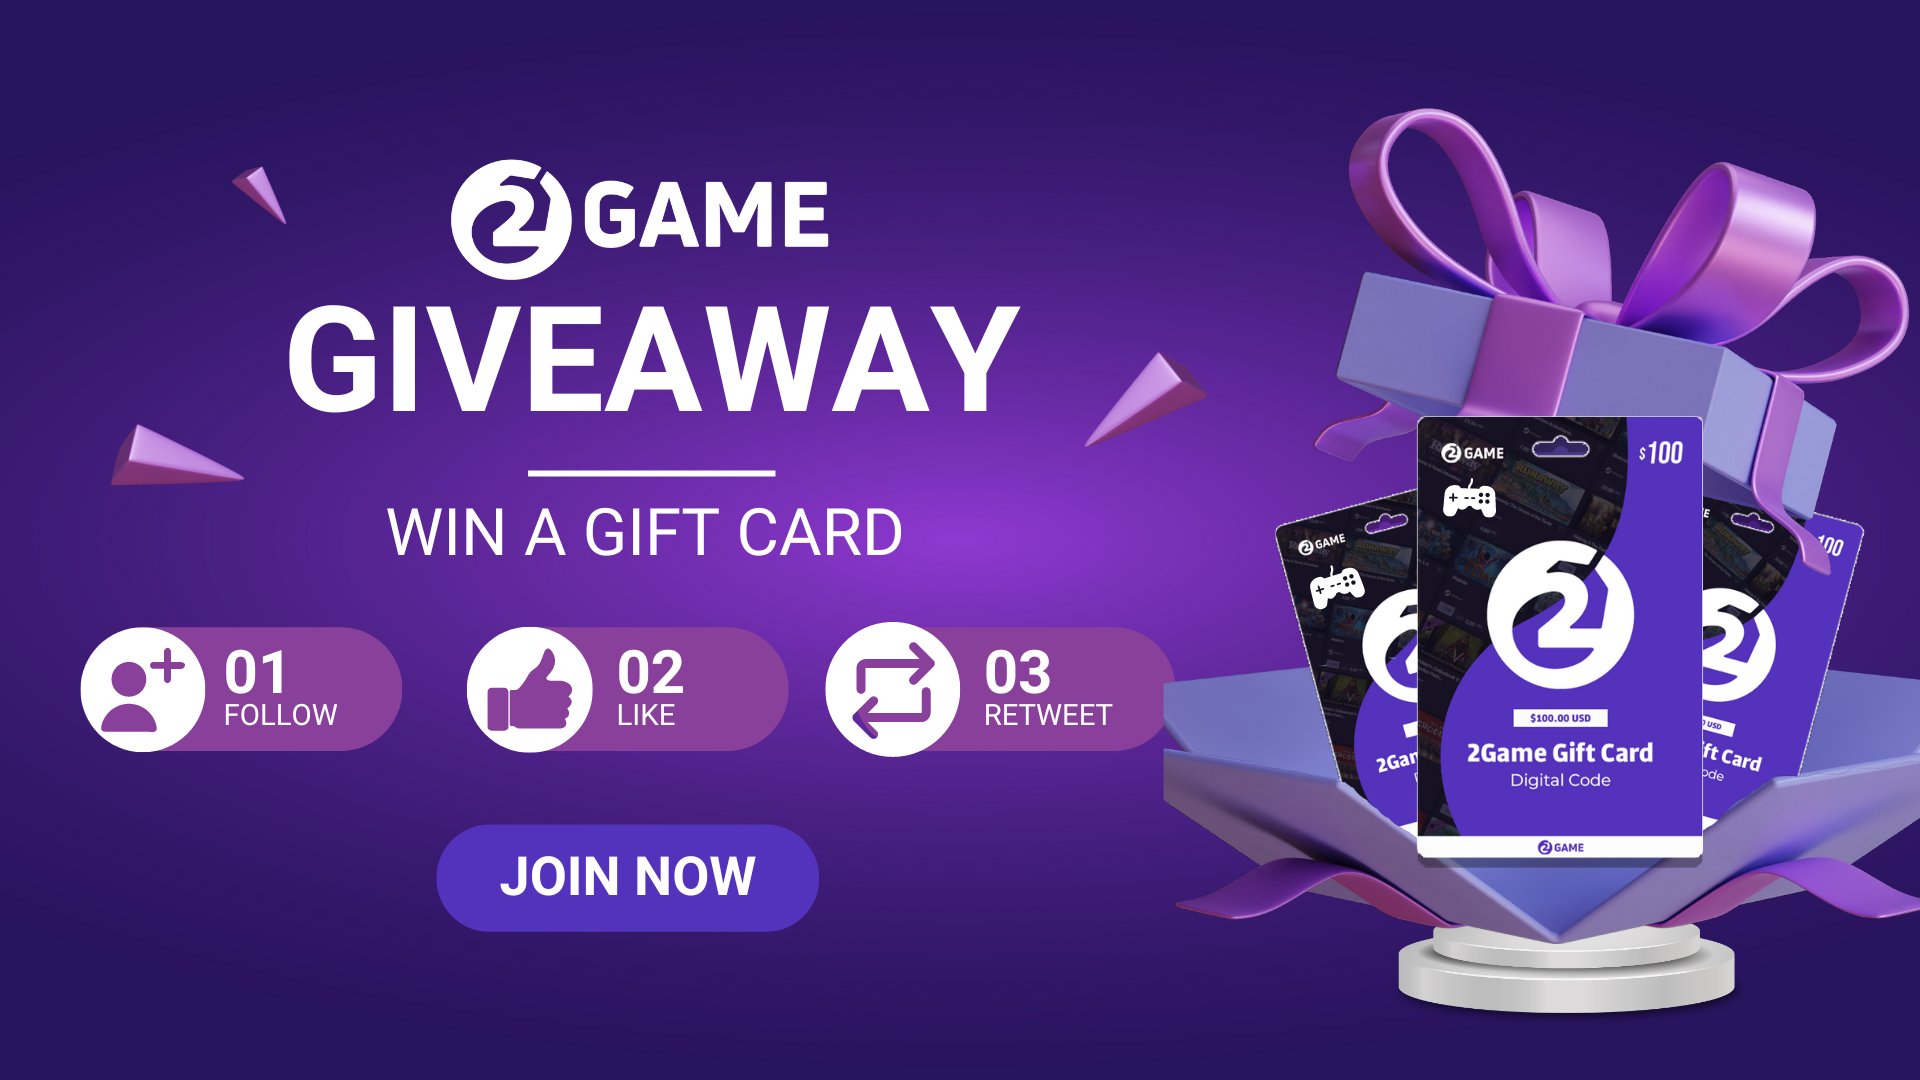 How To Redeem A Gift Card From 2Game